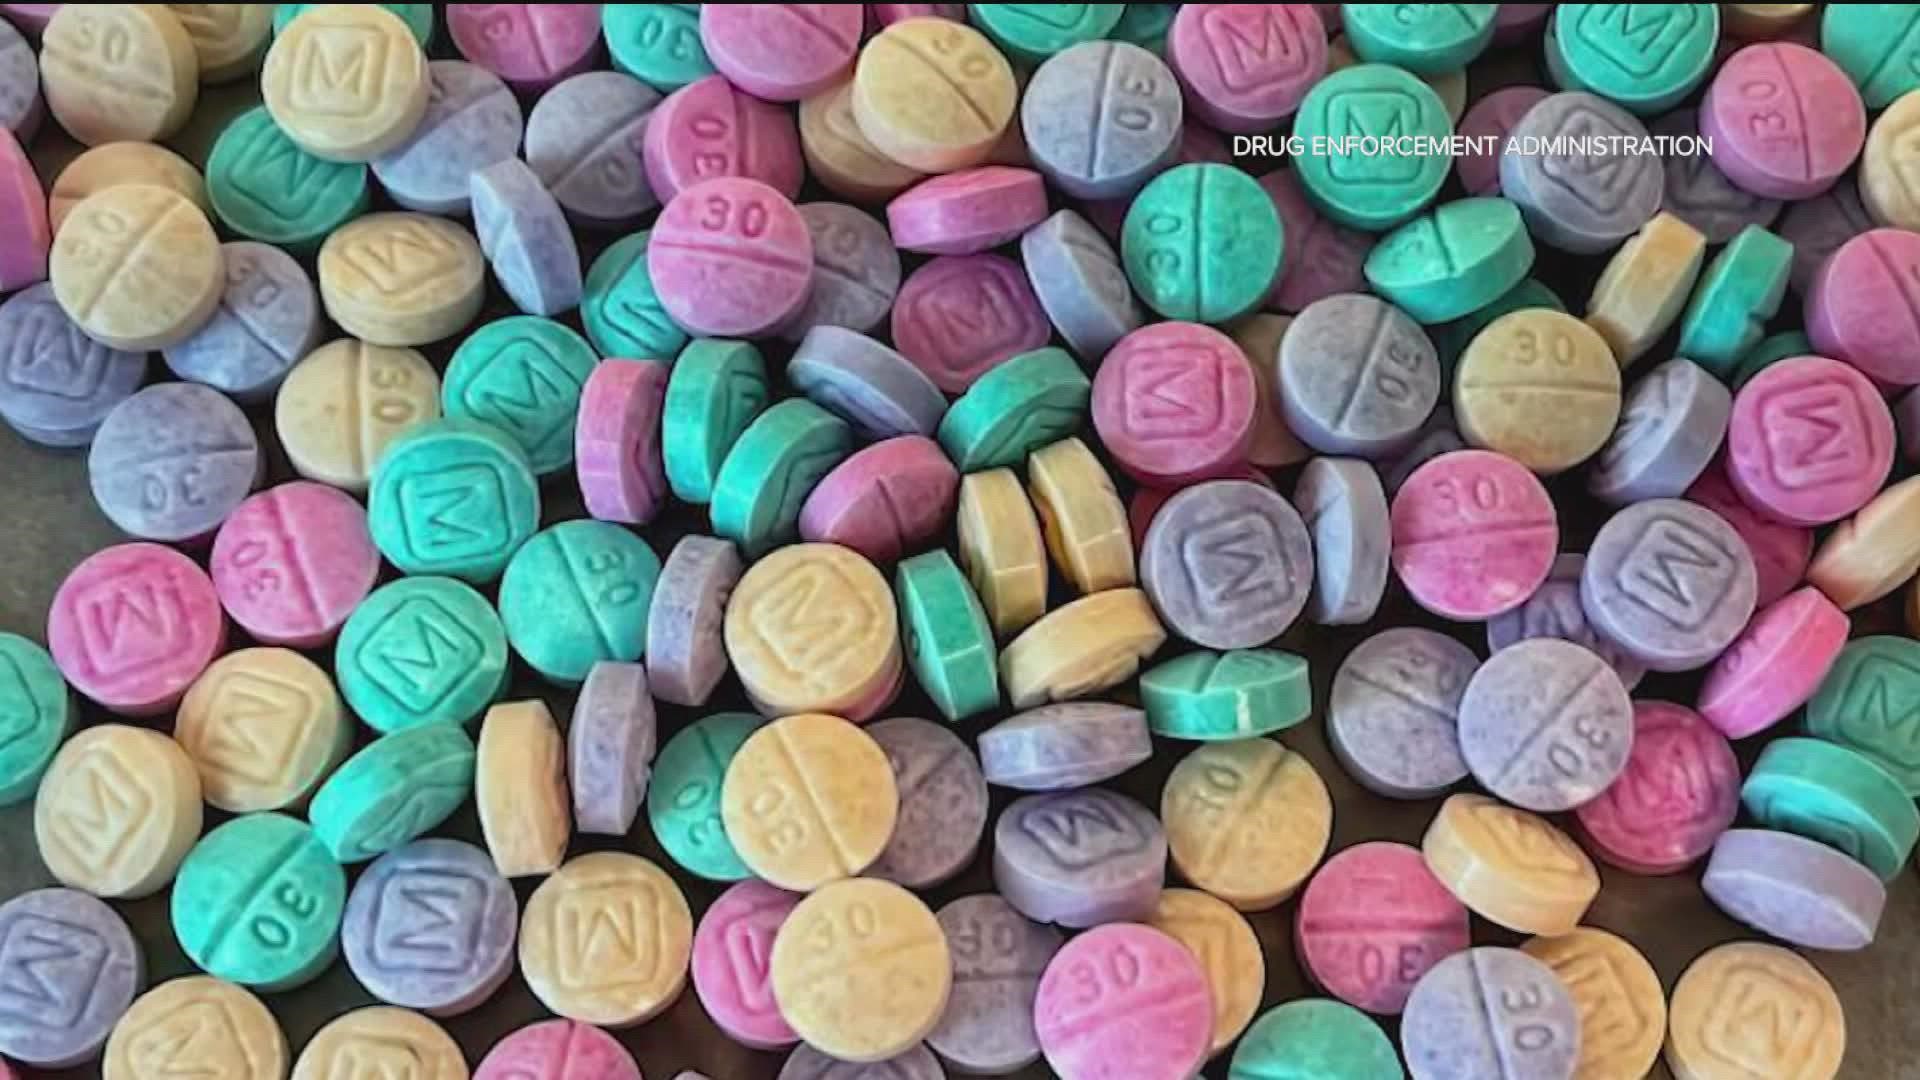 Rainbow fentanyl looks like candy and come in a variety of bright colors, shapes, and sizes and they’re being used to target children and young adults.